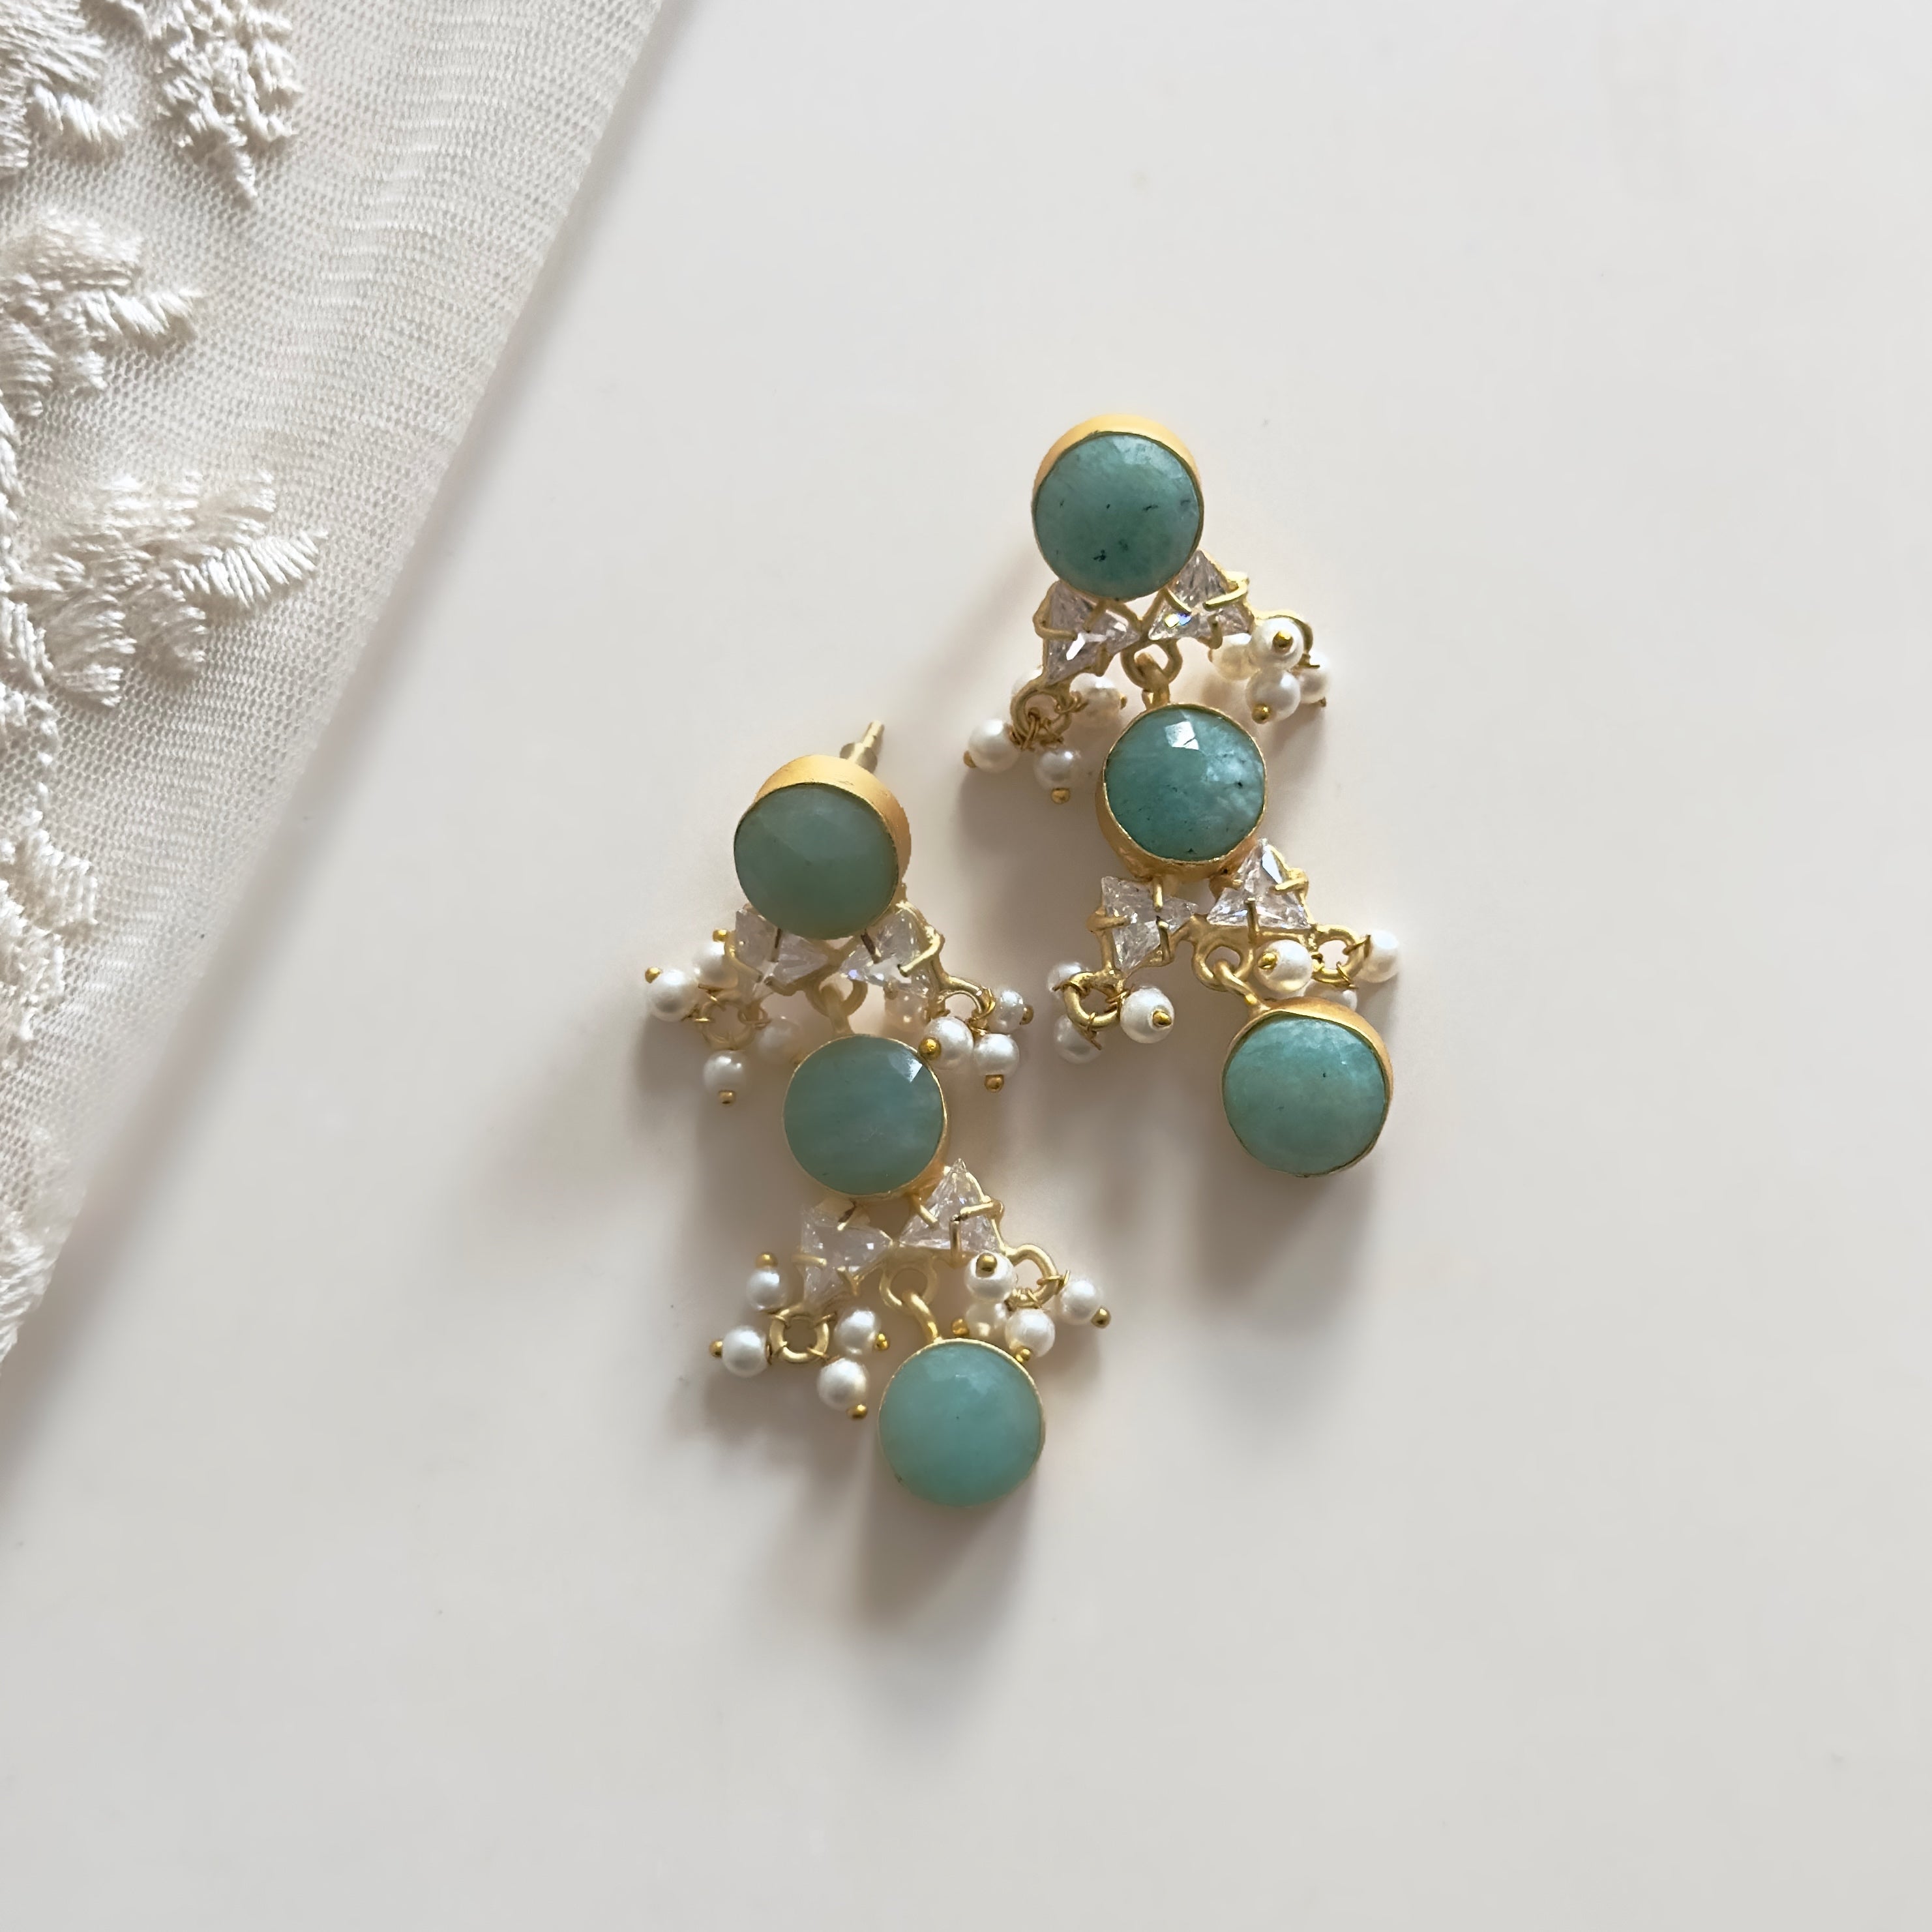 Experience beauty and elegance with our Sheena Jade Drop Earrings. These stunning earrings feature natural amazonite gemstones and sparkling cz crystals, bringing a touch of nature and luxury to your style. Elevate any outfit and feel confident and radiant wearing these exquisite earrings.